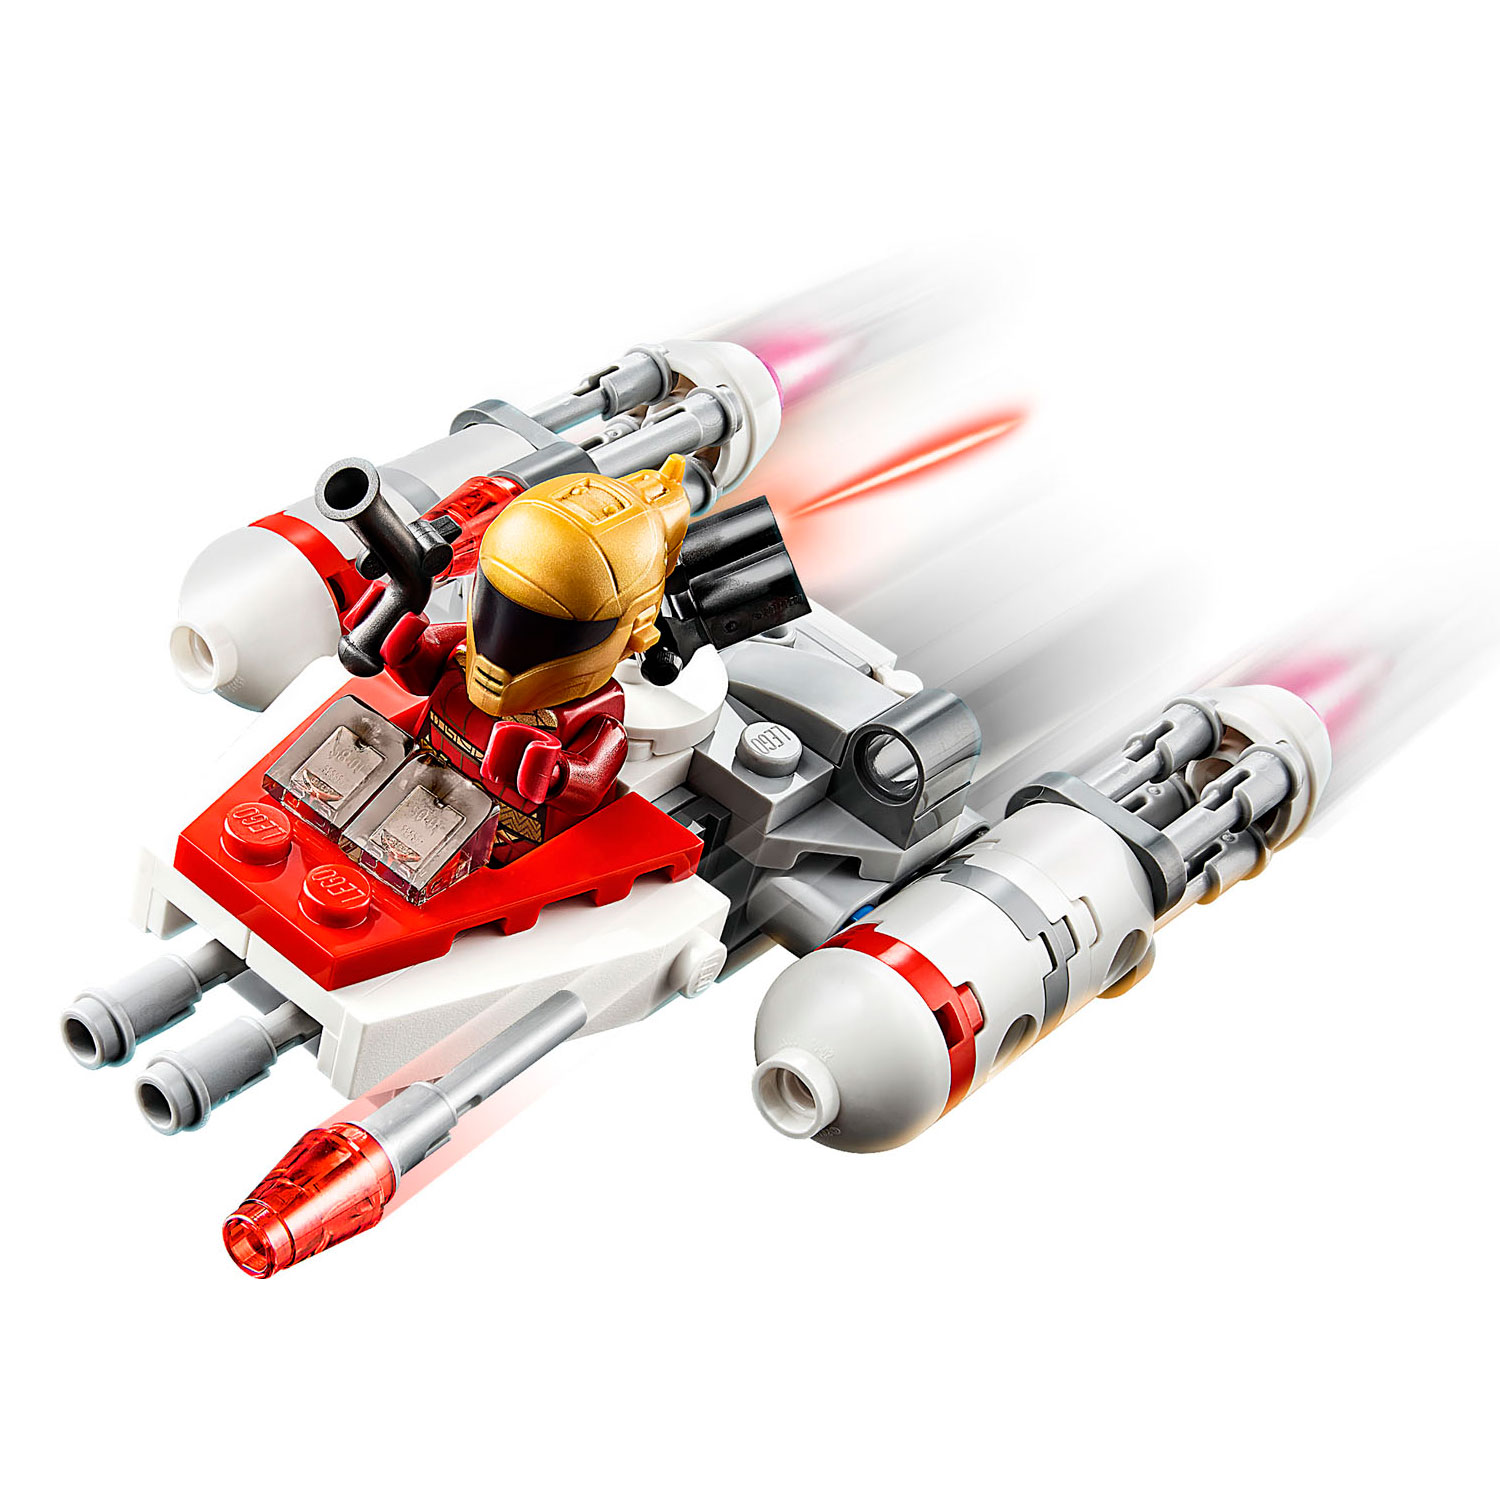 LEGO Star Wars 75263 Episode Resistance Y-wing Microfighter